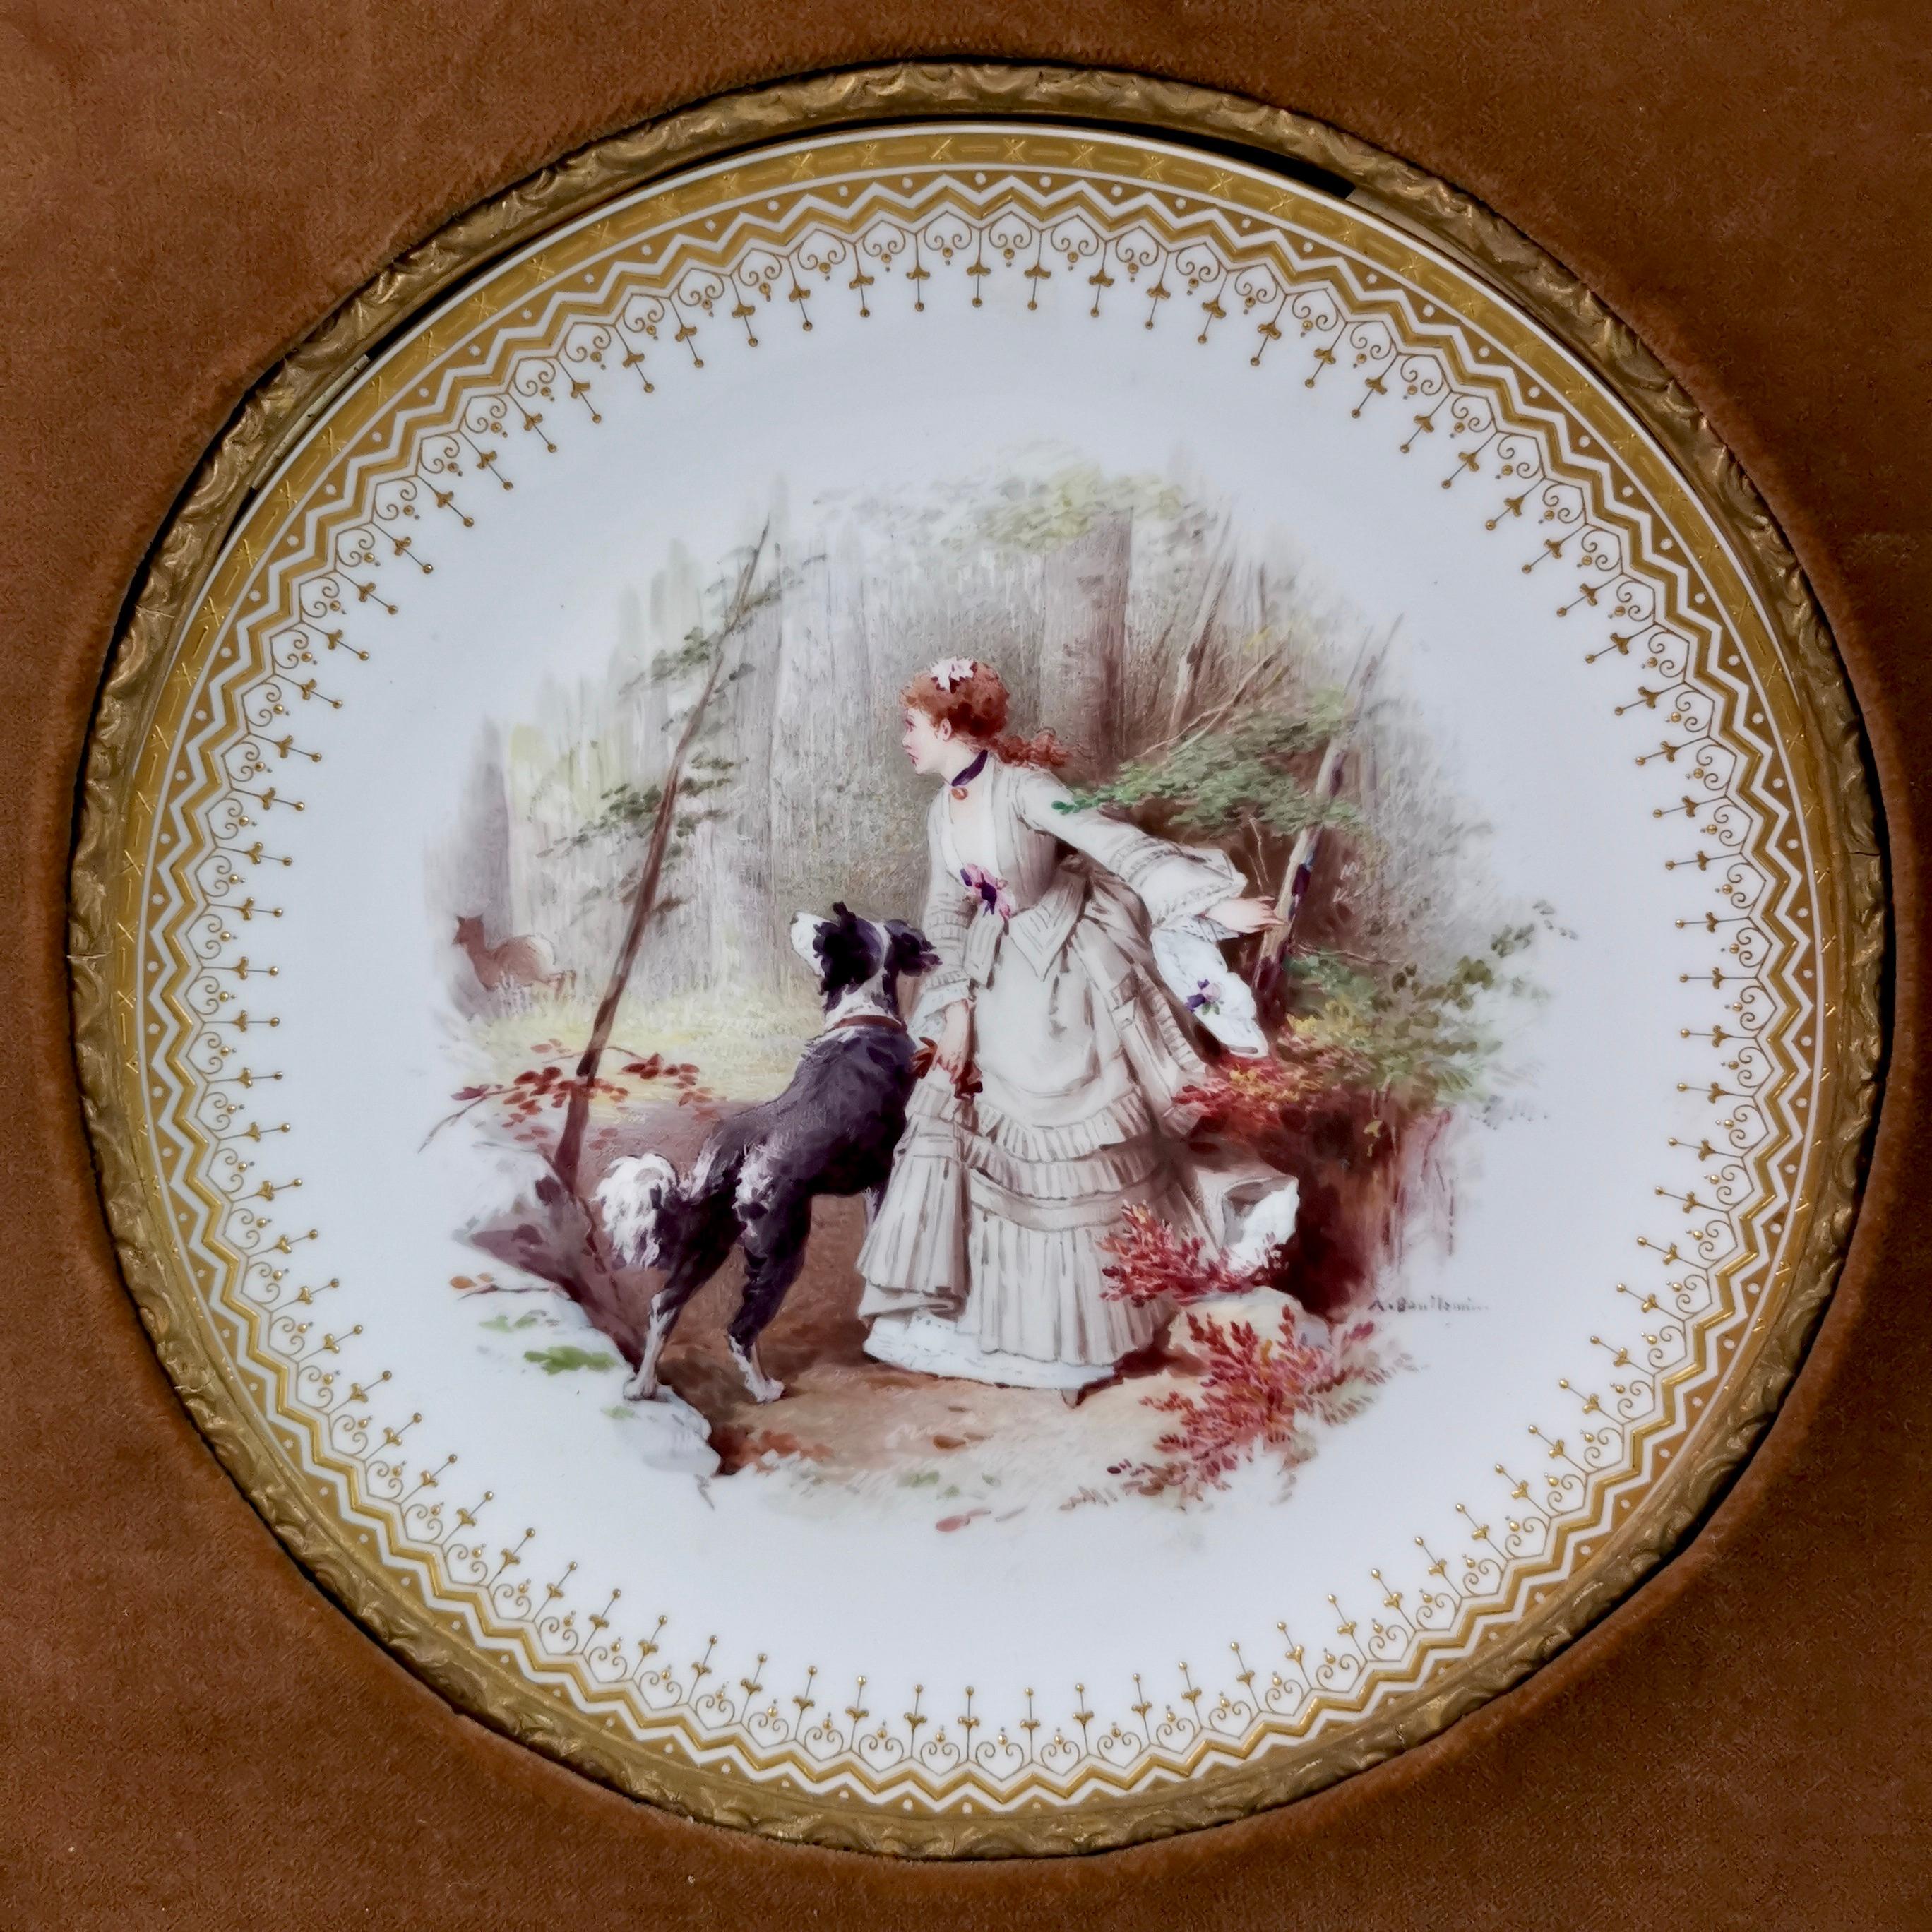 On offer is a stunning framed cabinet plate made by Minton in 1882. The plate is painted by the famous porcelain artist Antonin Boullemier and is framed in a gilt Italianate Rococo scroll frame.
 
Minton was one of the pioneers of English china